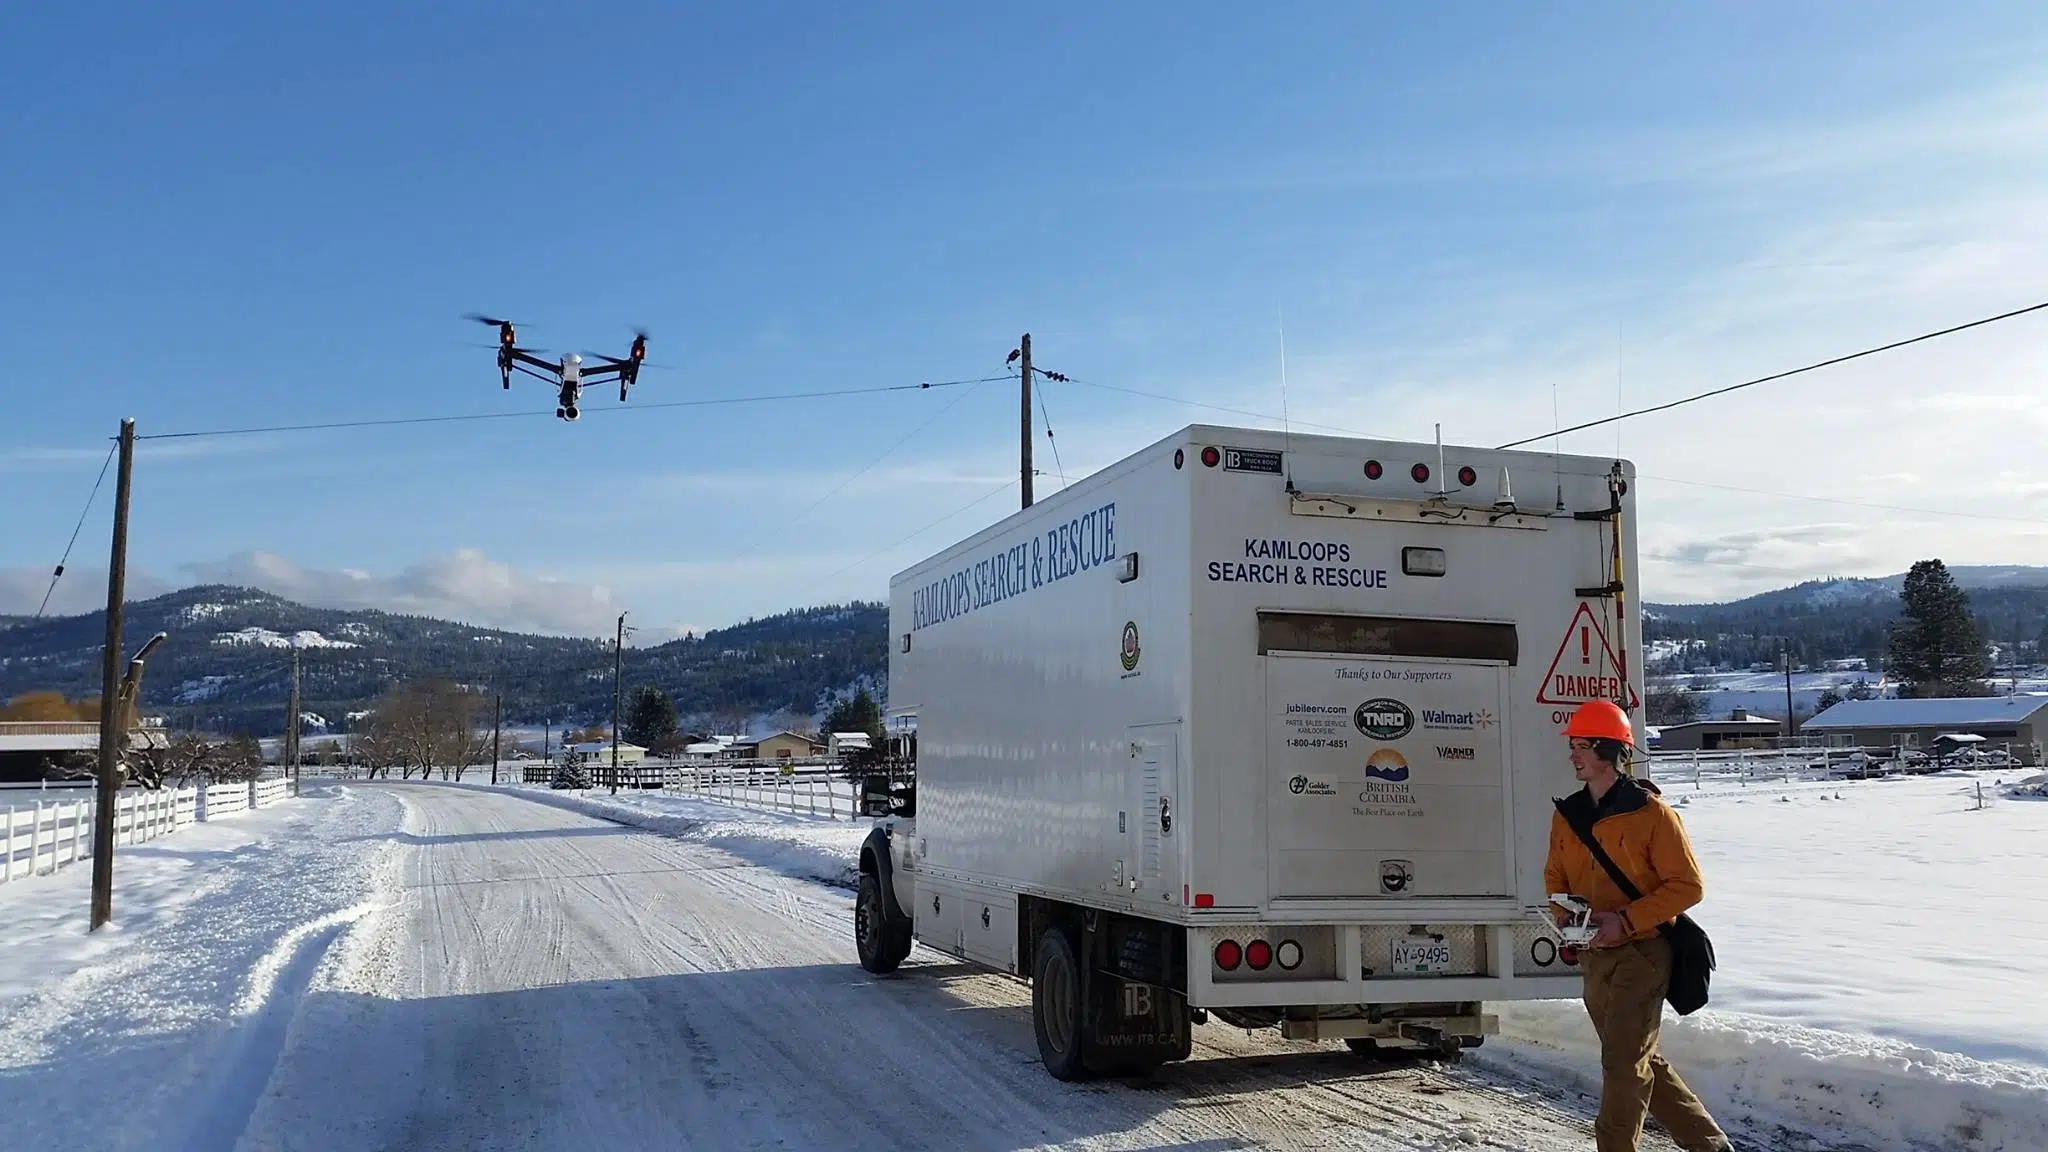 Drone technology used by Kamloops Search and Rescue will see another year of use